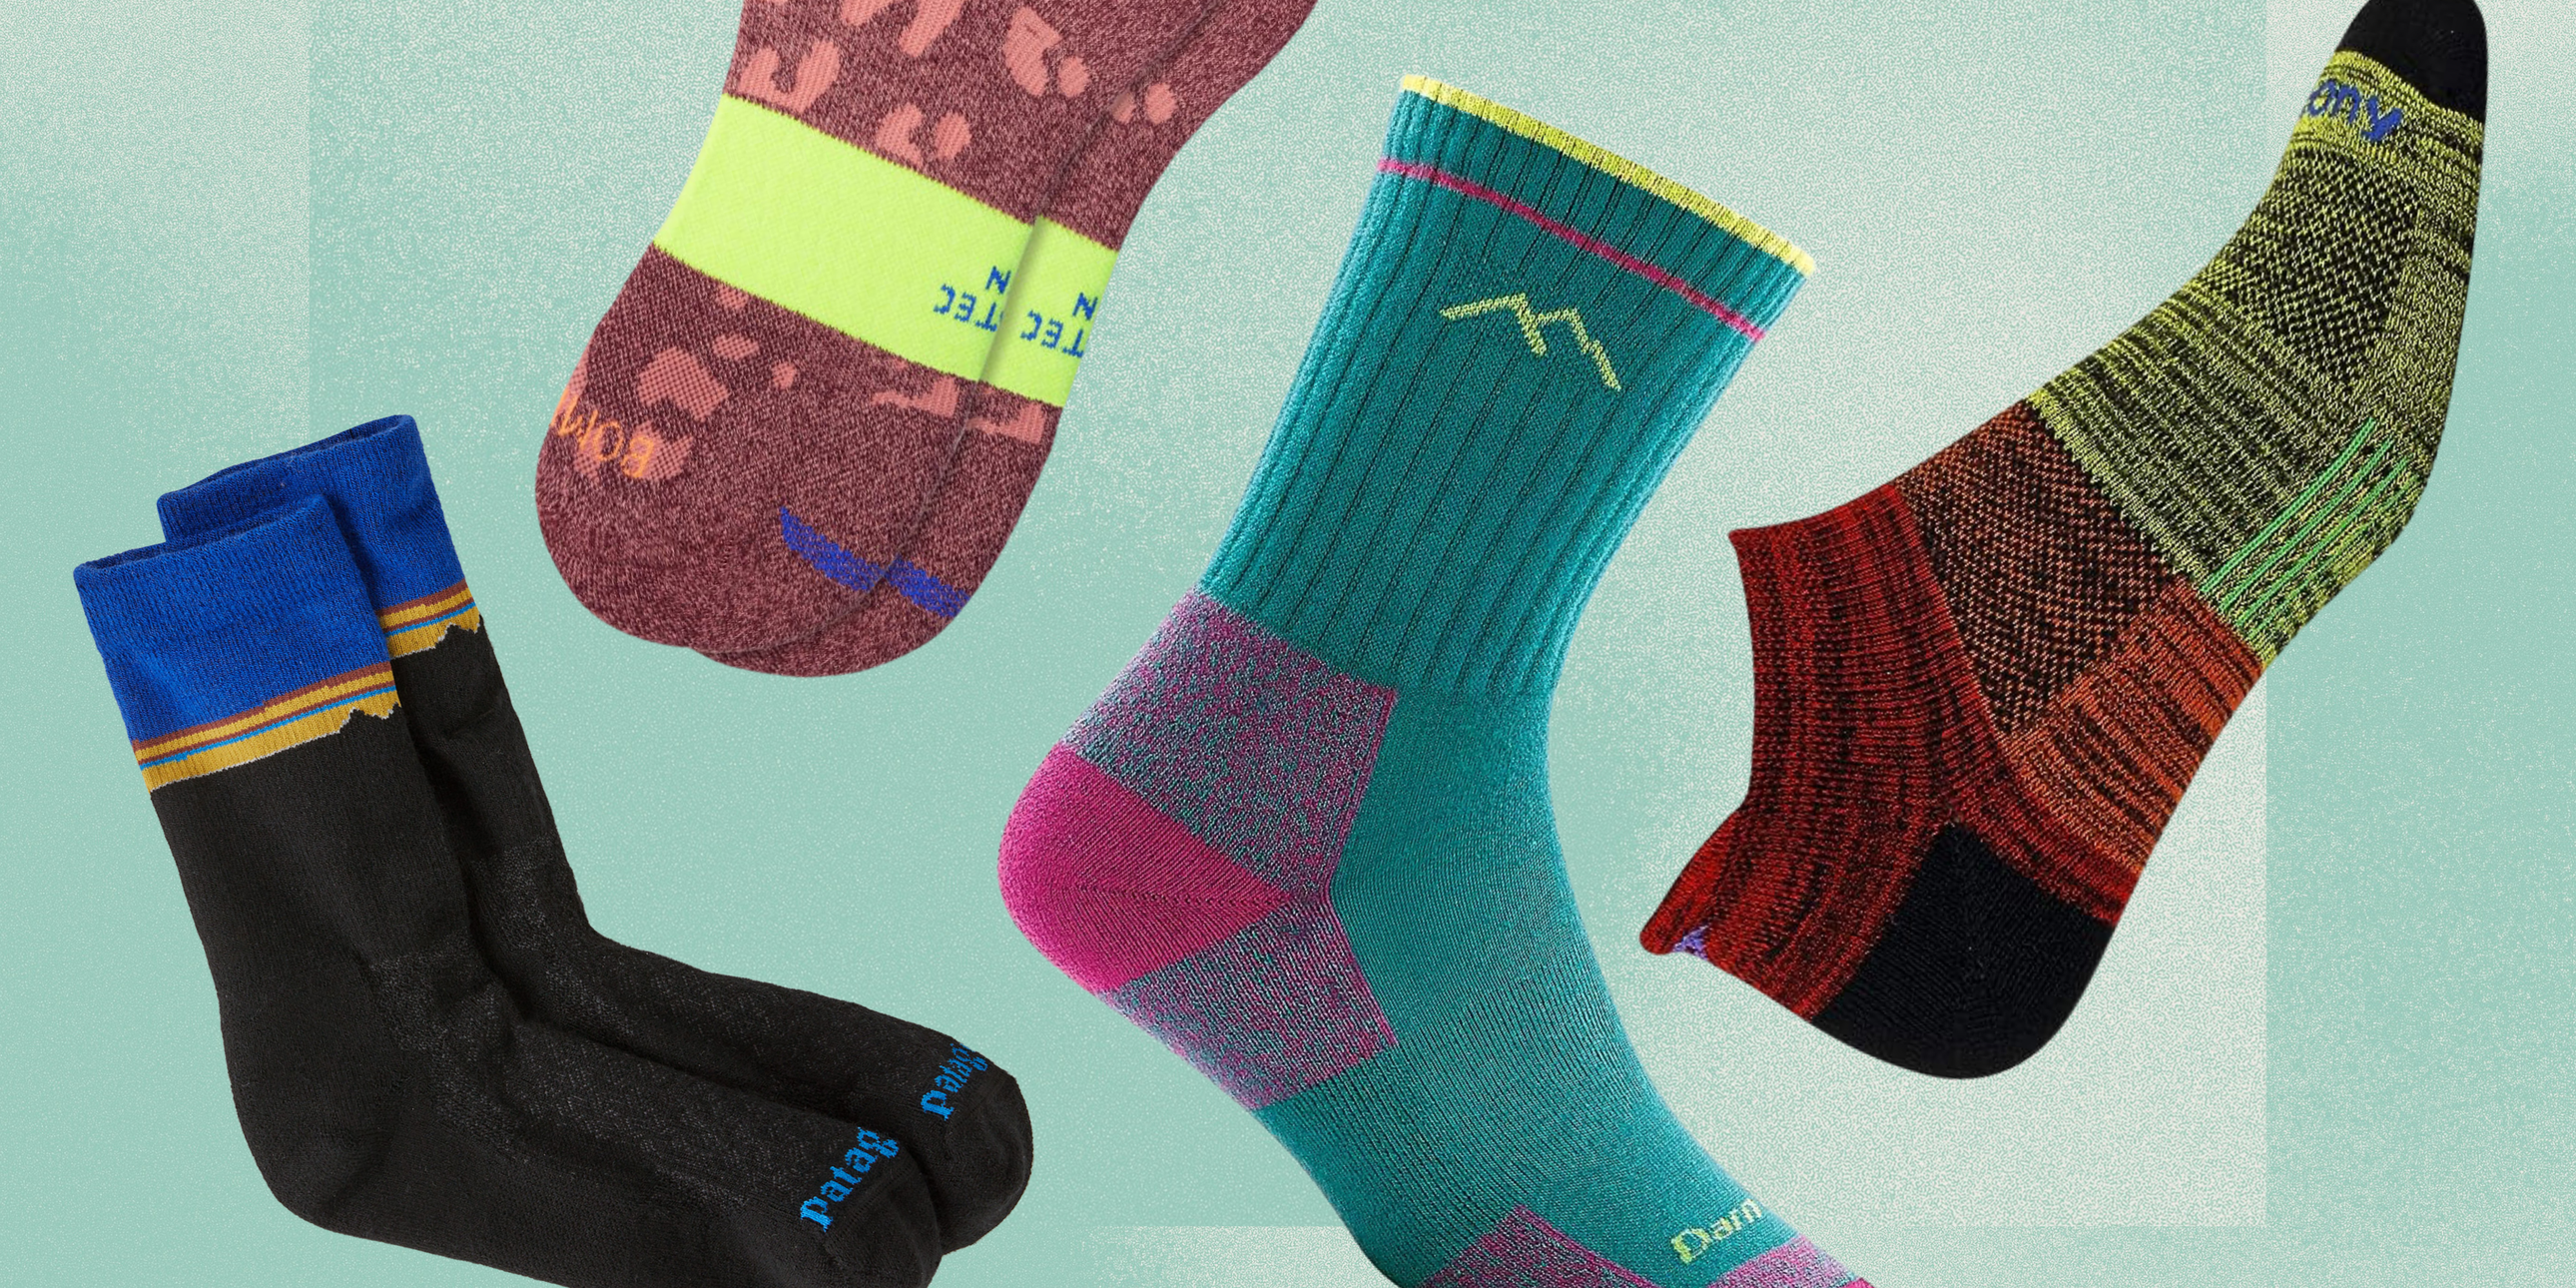 10 Best Socks for Sweaty Feet, According to Experts in 2023